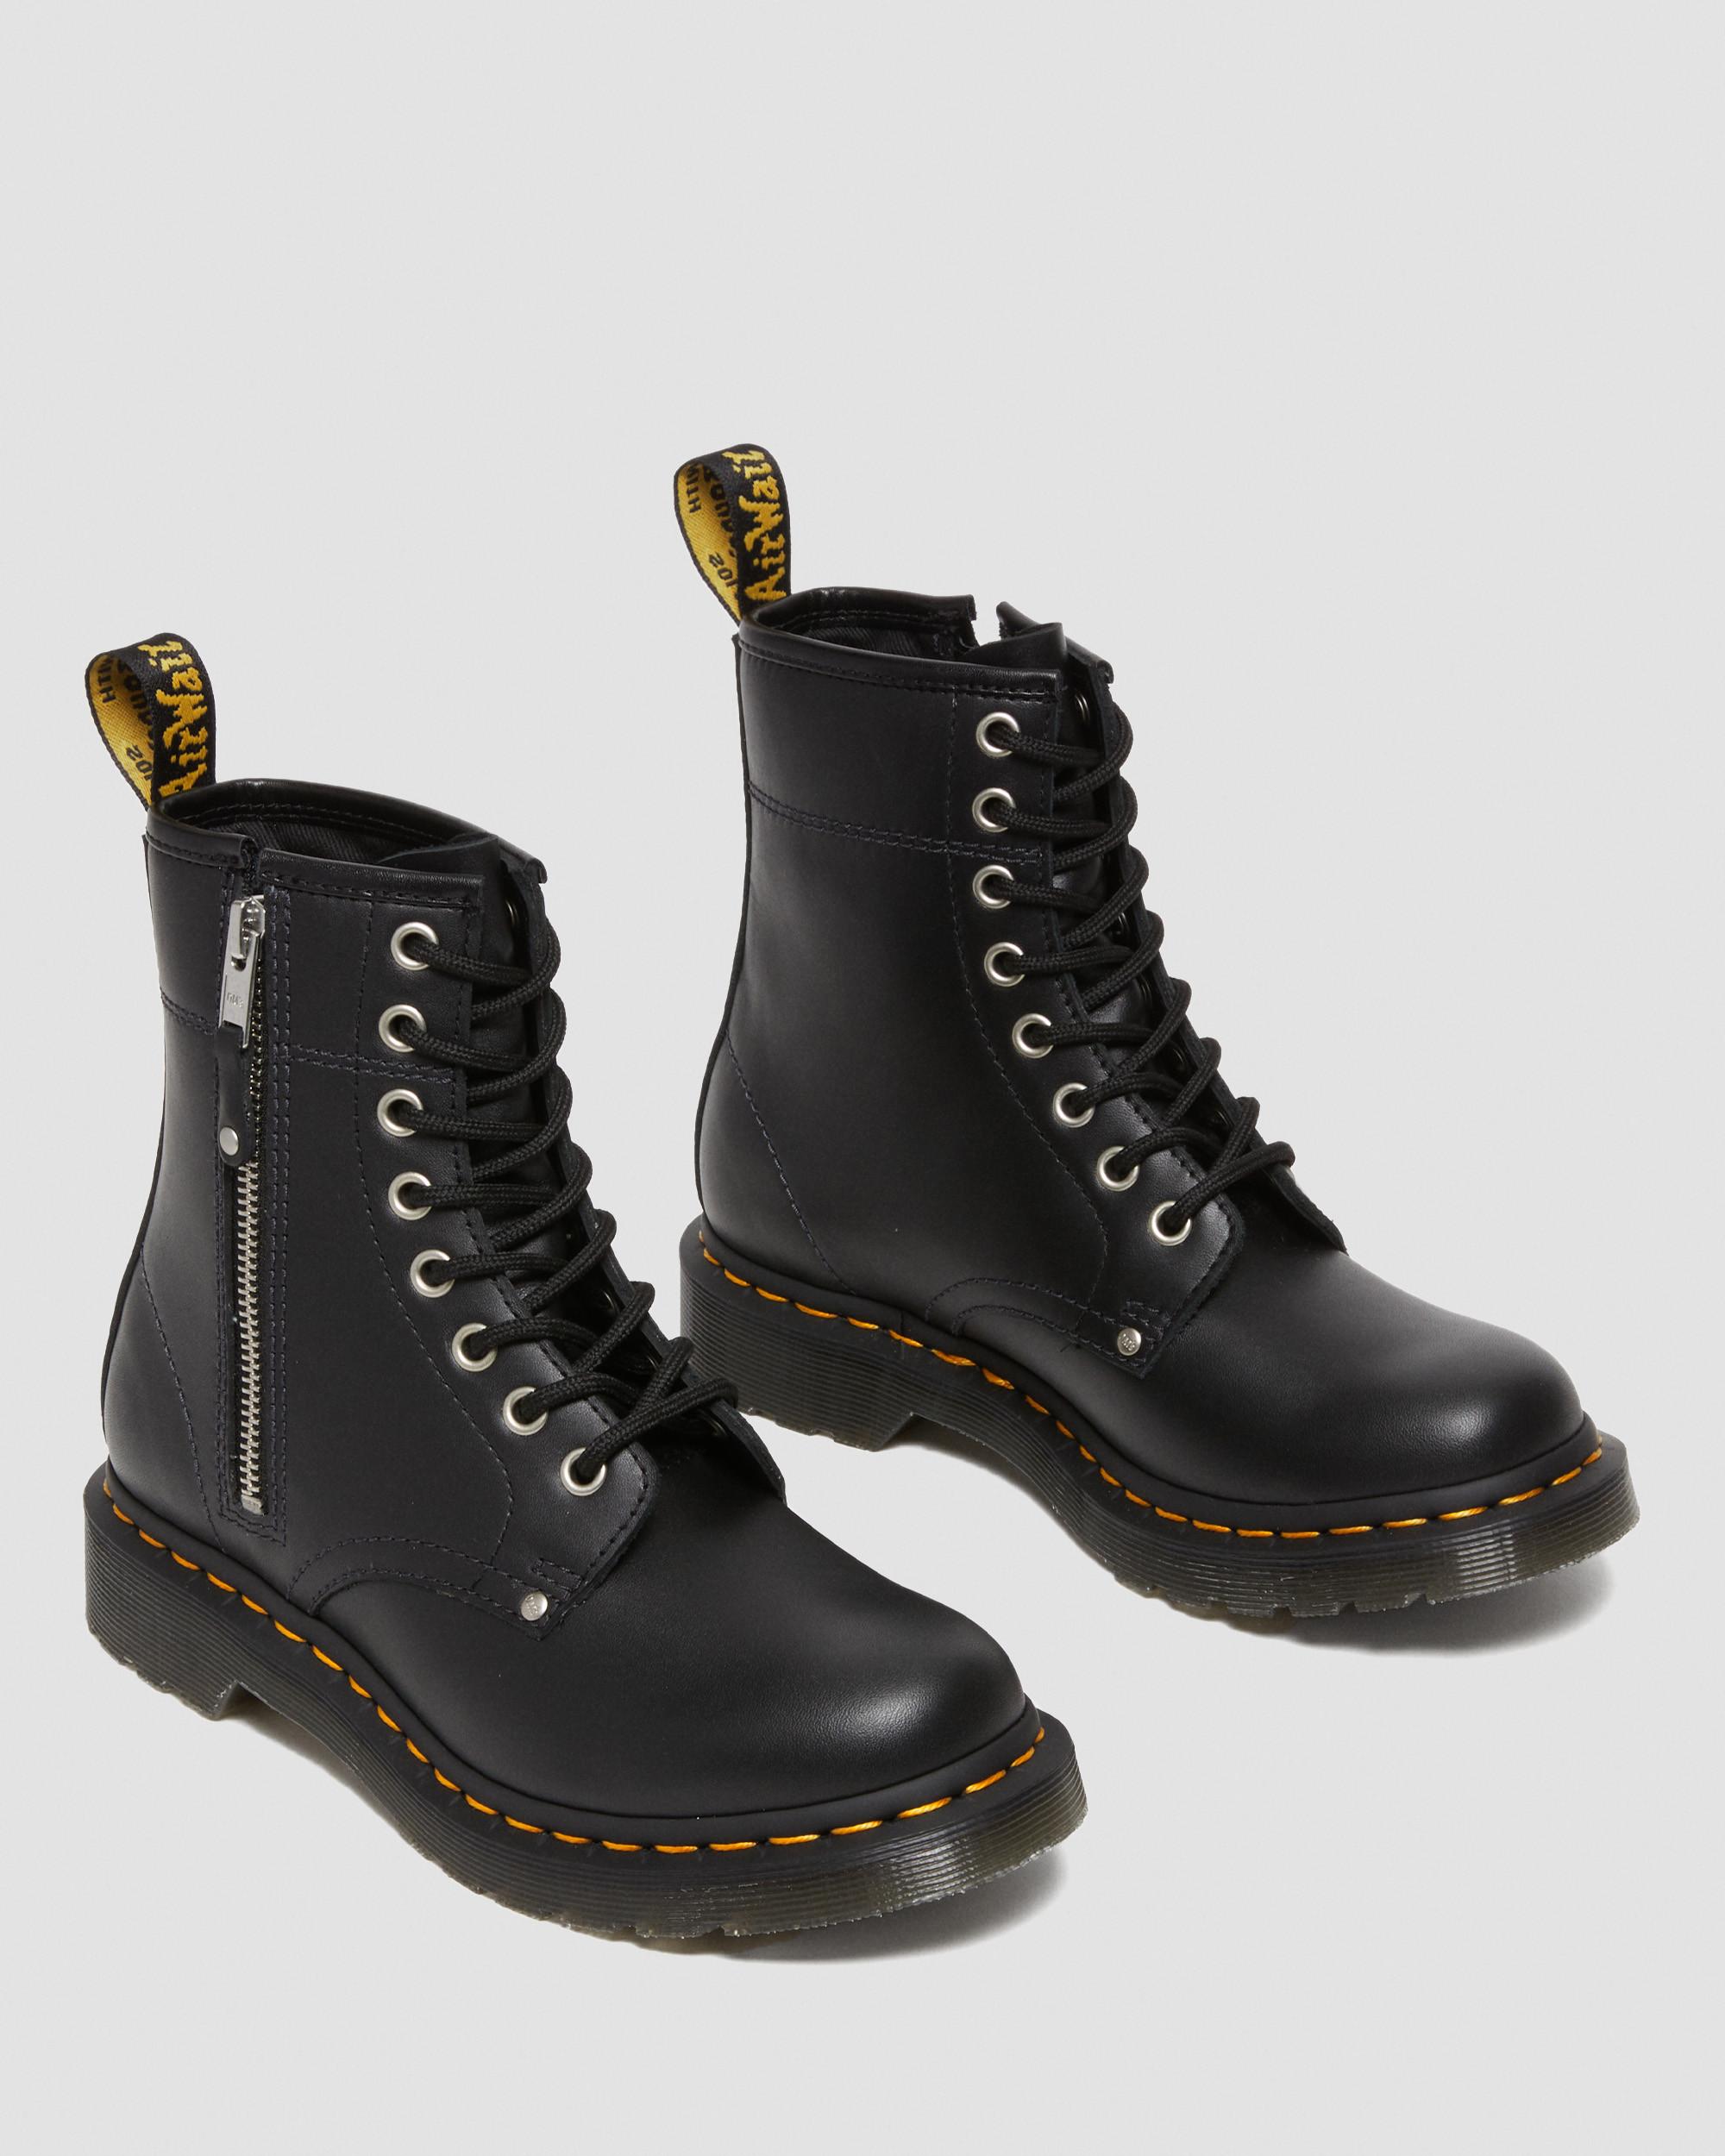 1460 Women's Double Zip Leather Lace Up Boots in Black | Dr. Martens